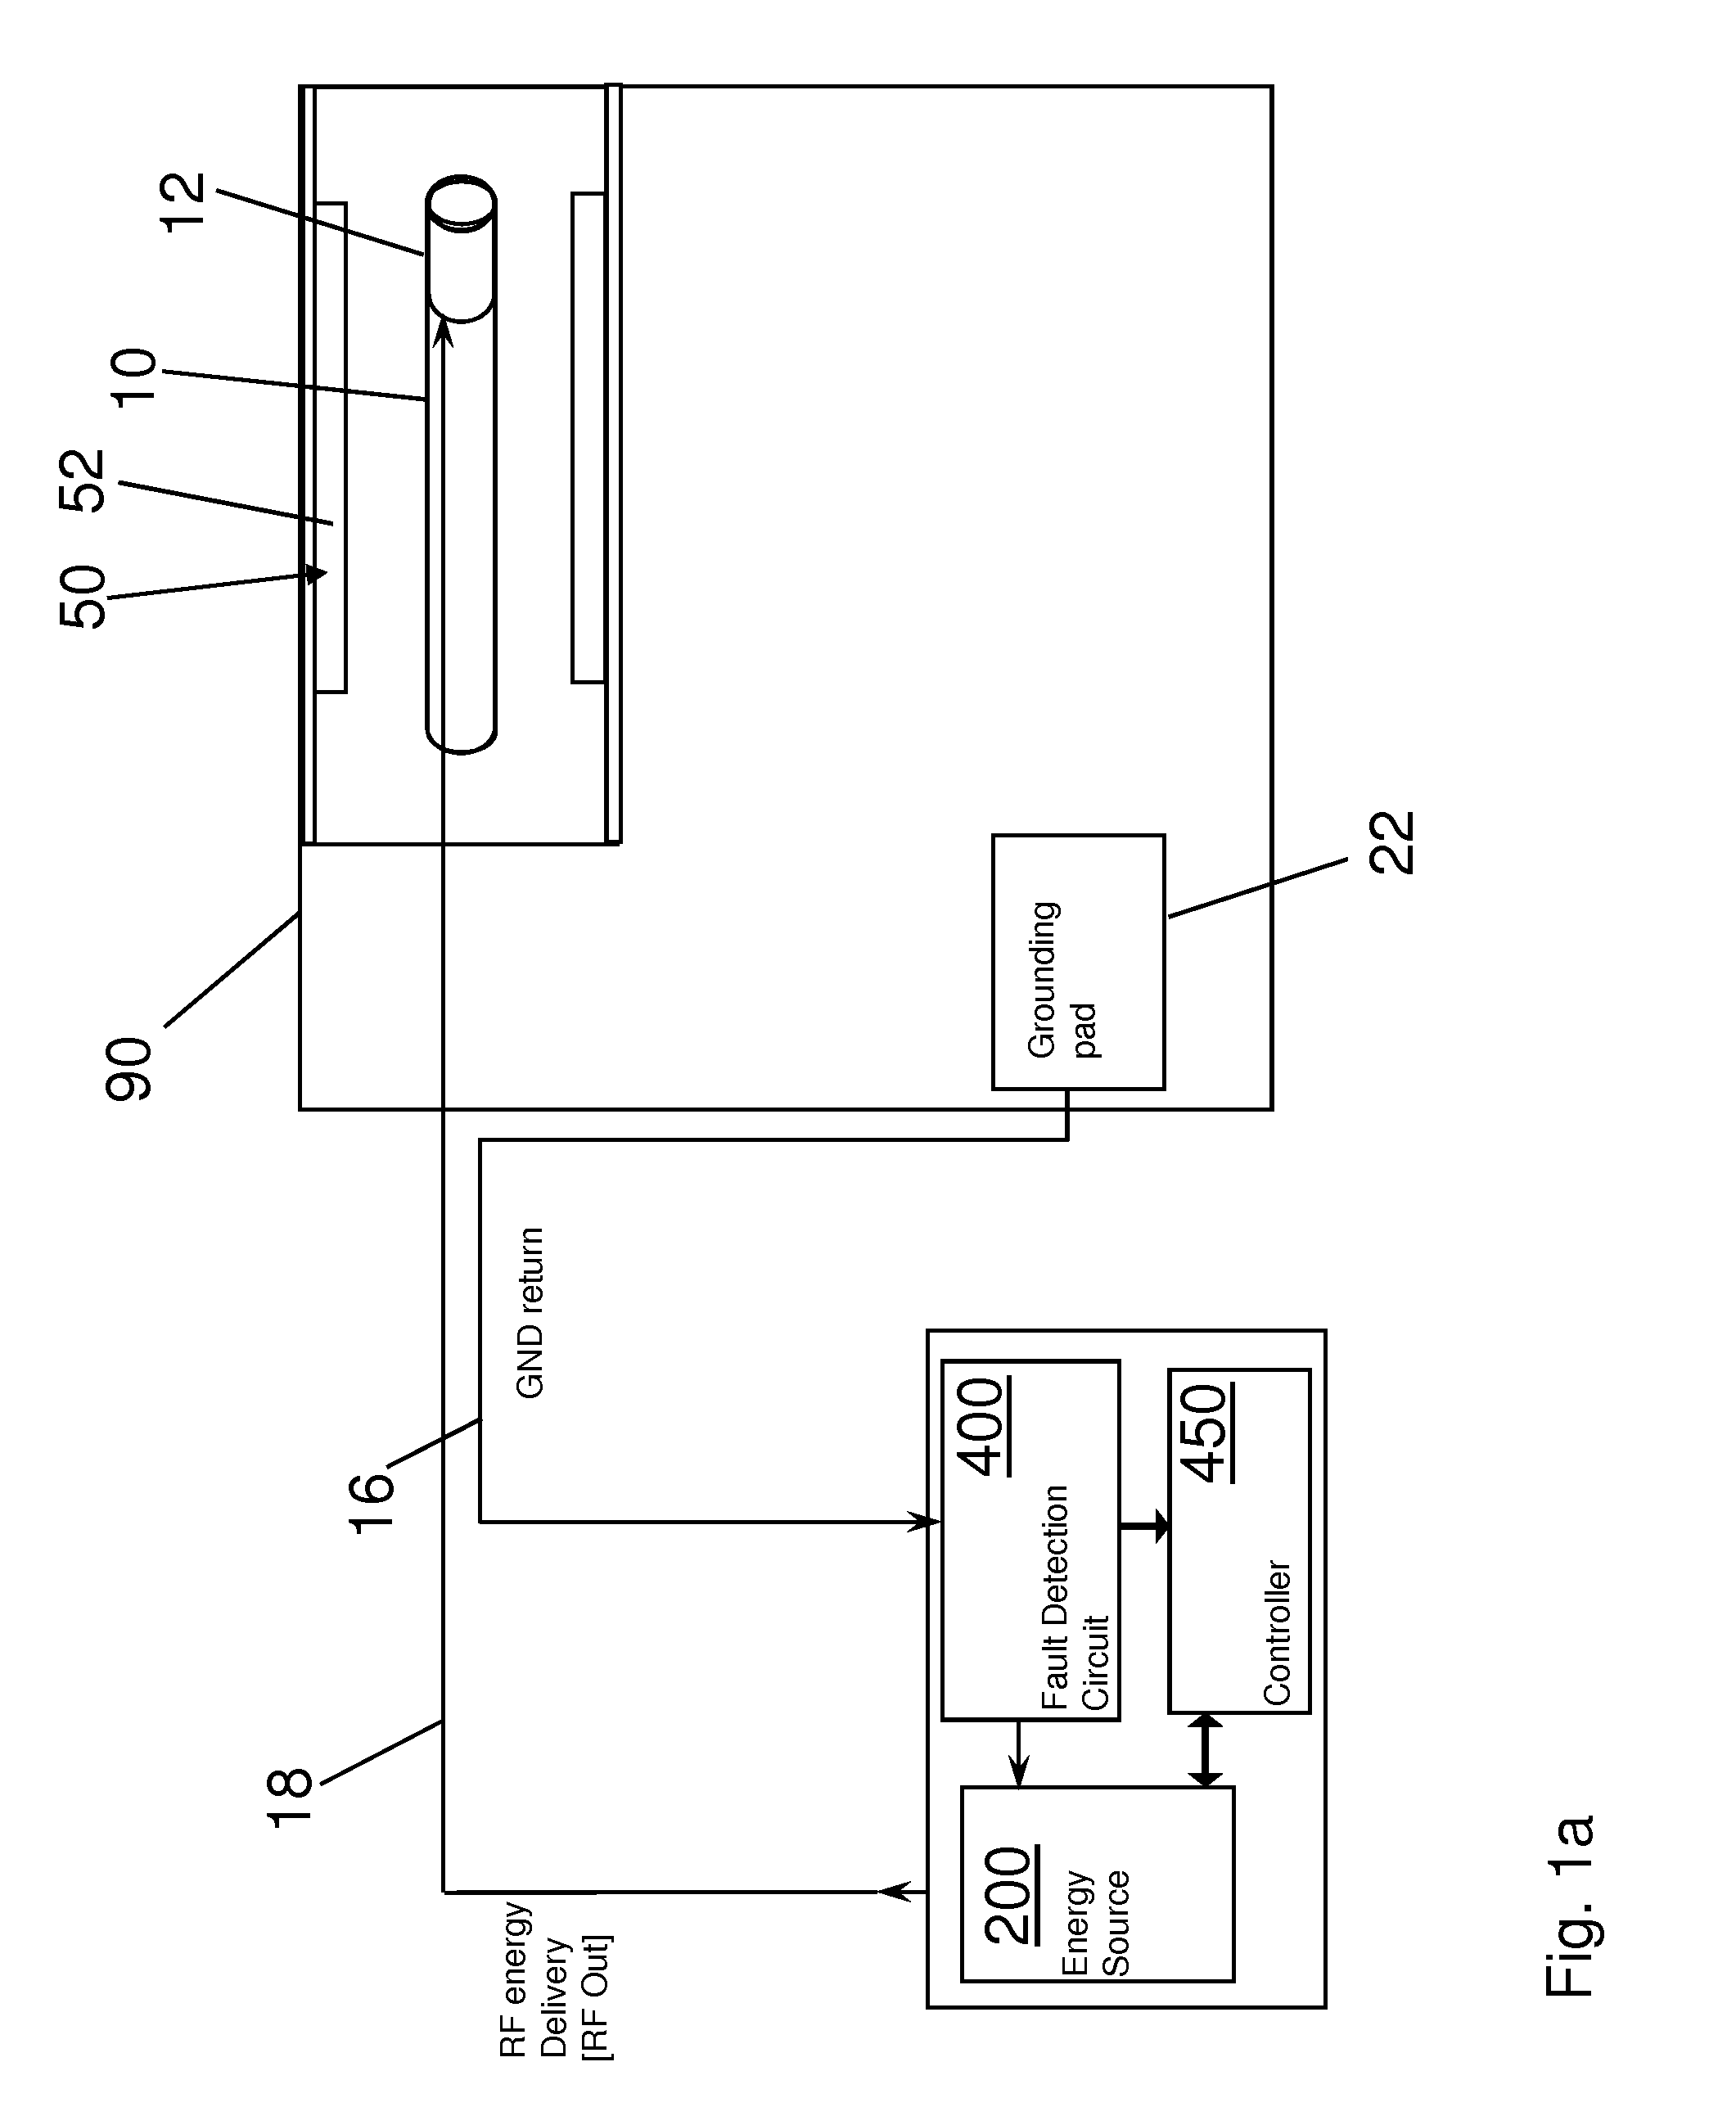 Monitoring and controlling energy delivery of an electrosurgical device